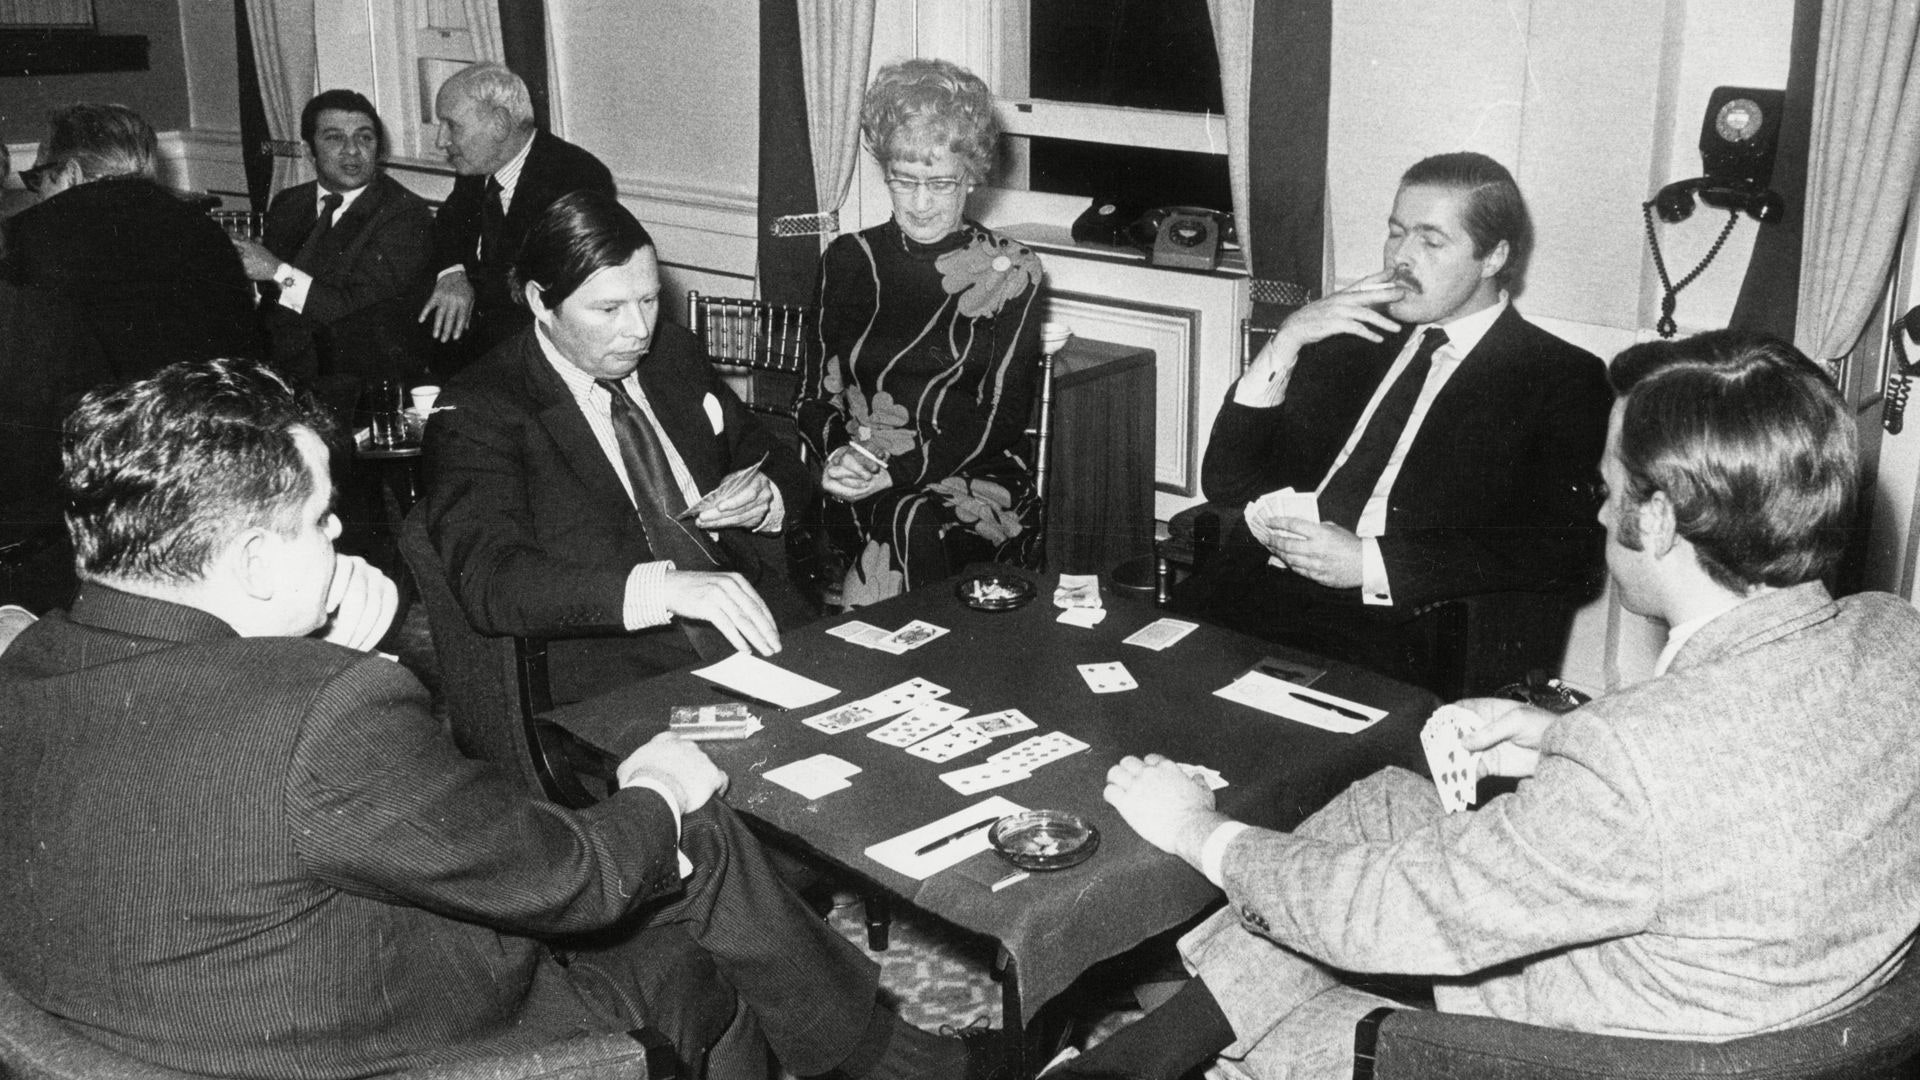 Lord Lucan playing cards